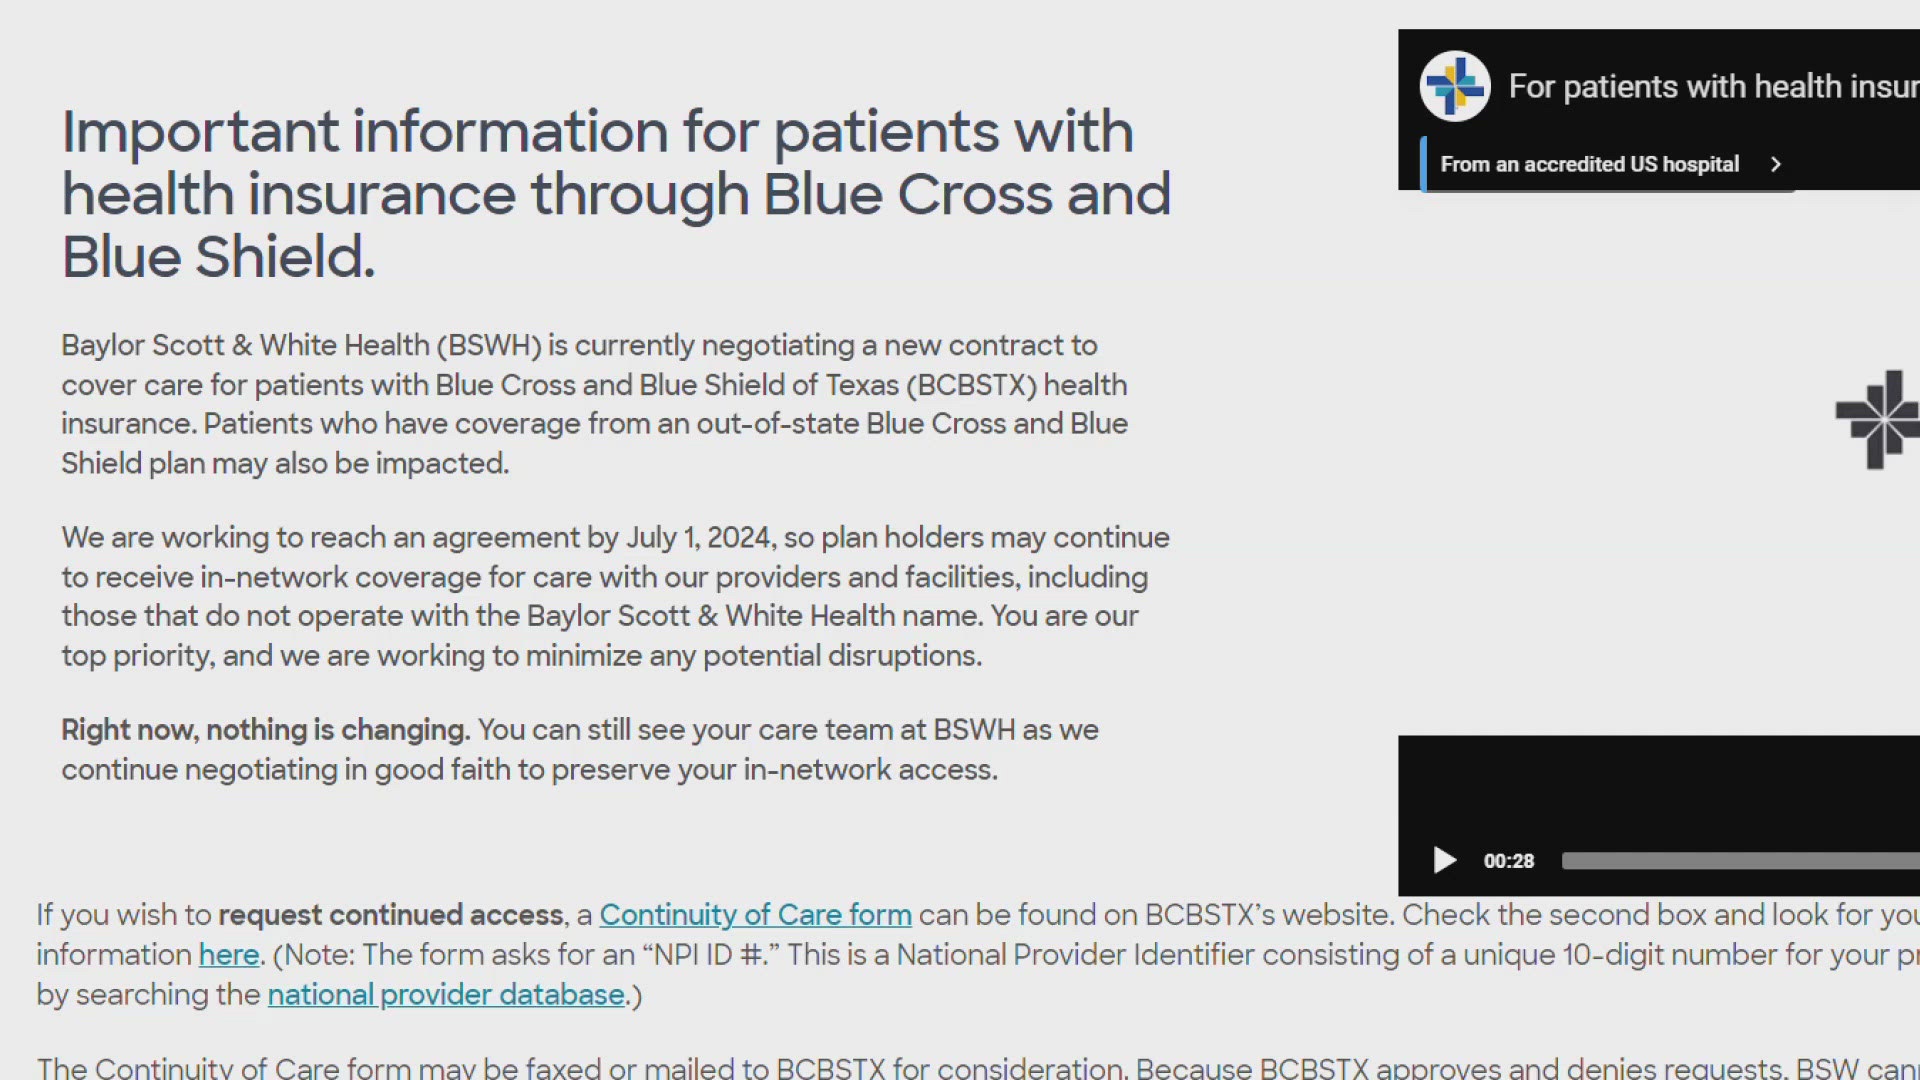 BCBS and BS&W are working to reach an agreement by July 1, 2024 so plan holders may continue to receive in-network coverage for care.